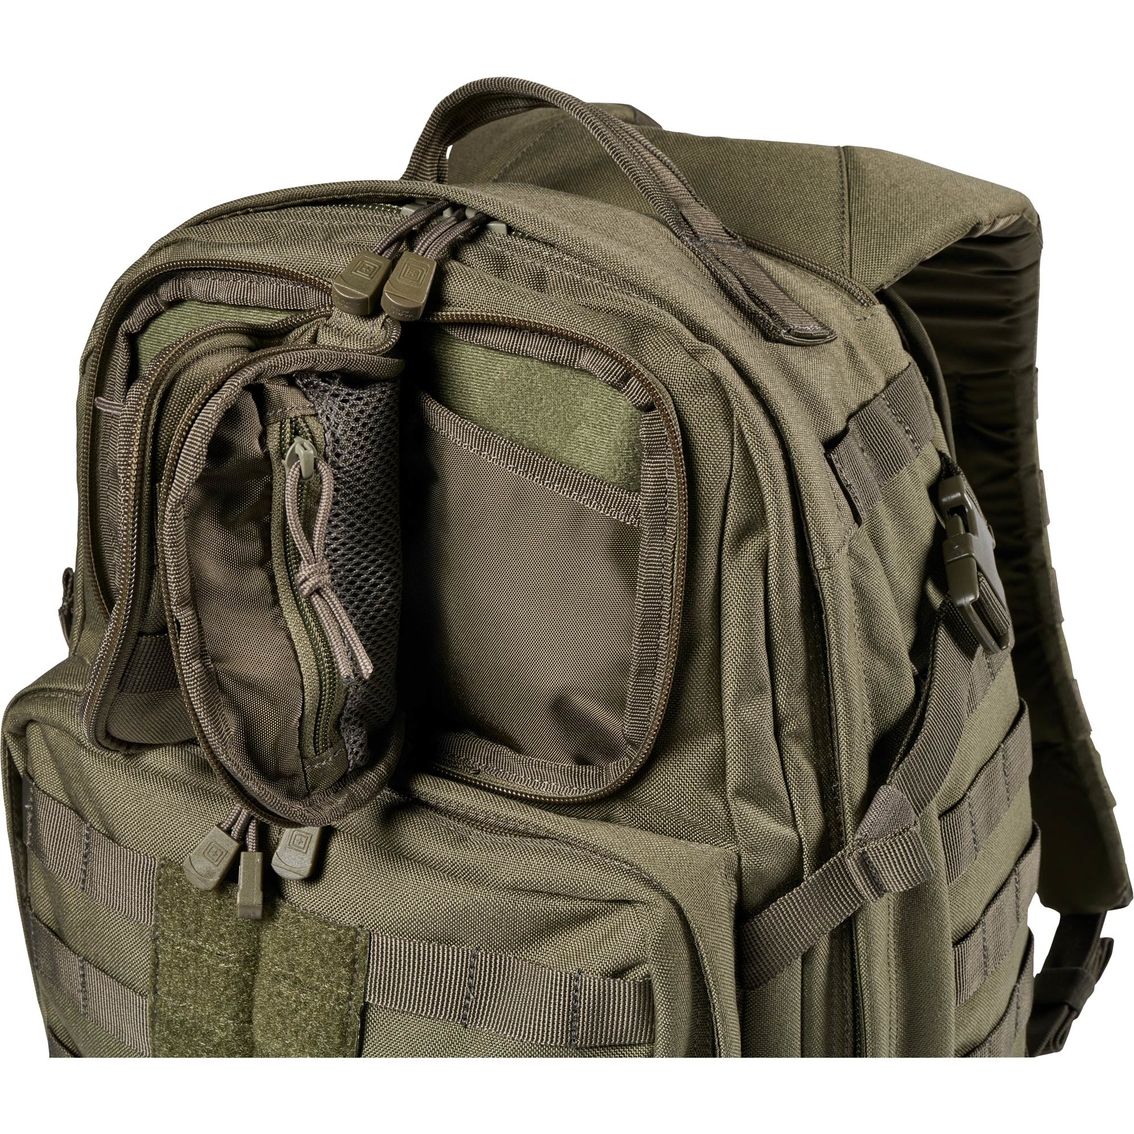 5.11 RUSH 24 2.0 Backpack - Image 9 of 9